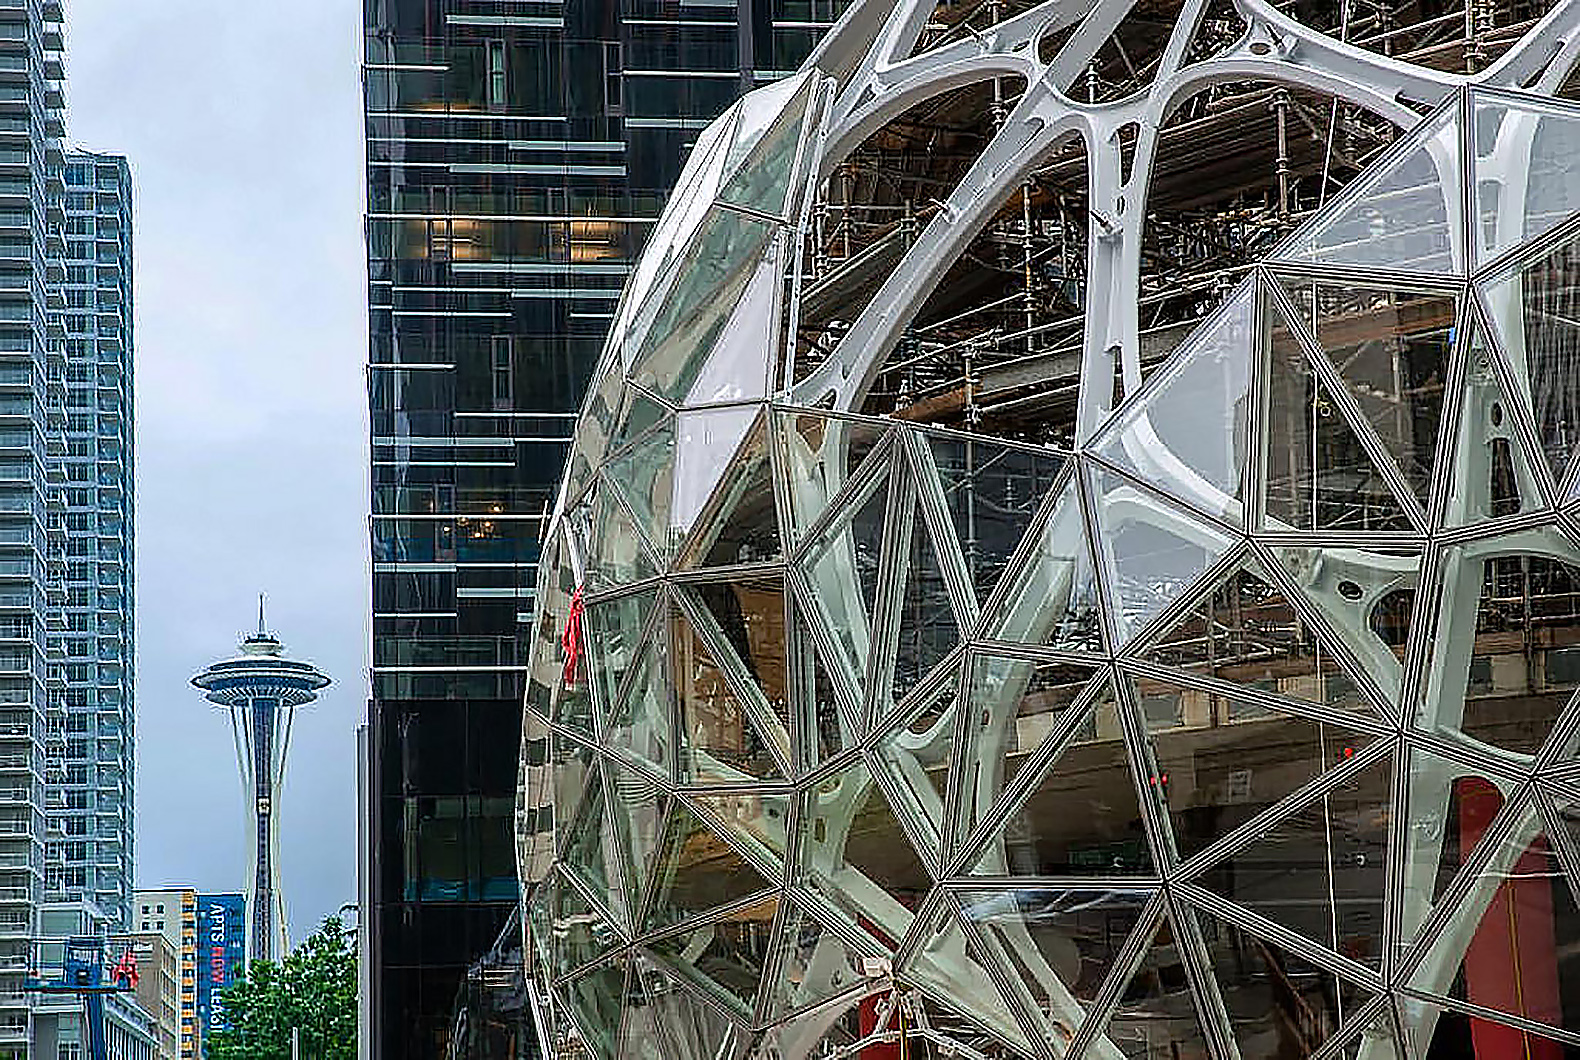 Amazon’s biosphere domes are slowly taking shape in Seattle